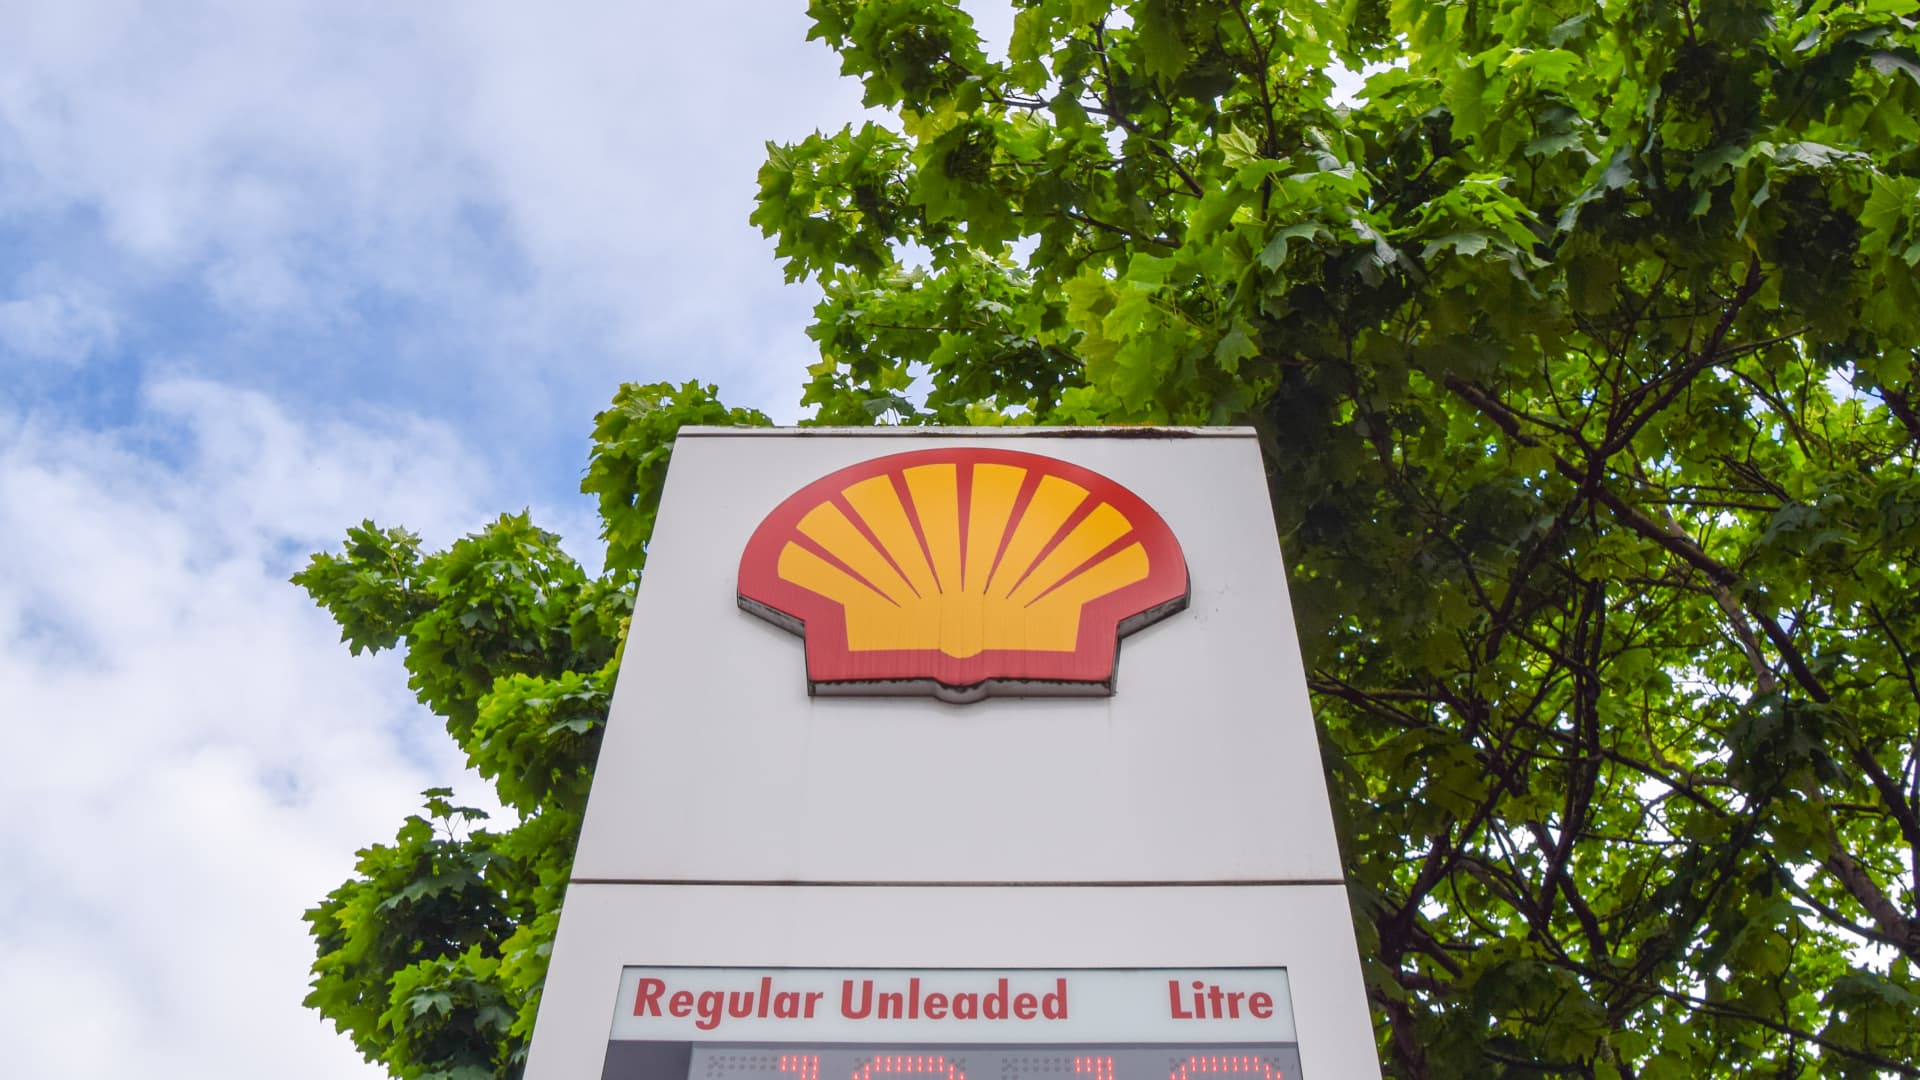 A Shell logo seen at a petrol station in London. A court in The Hague has ordered oil giant Shell to reduce its carbon emissions by 45% compared to 2019 levels by 2030, in what is widely seen as a landmark case.